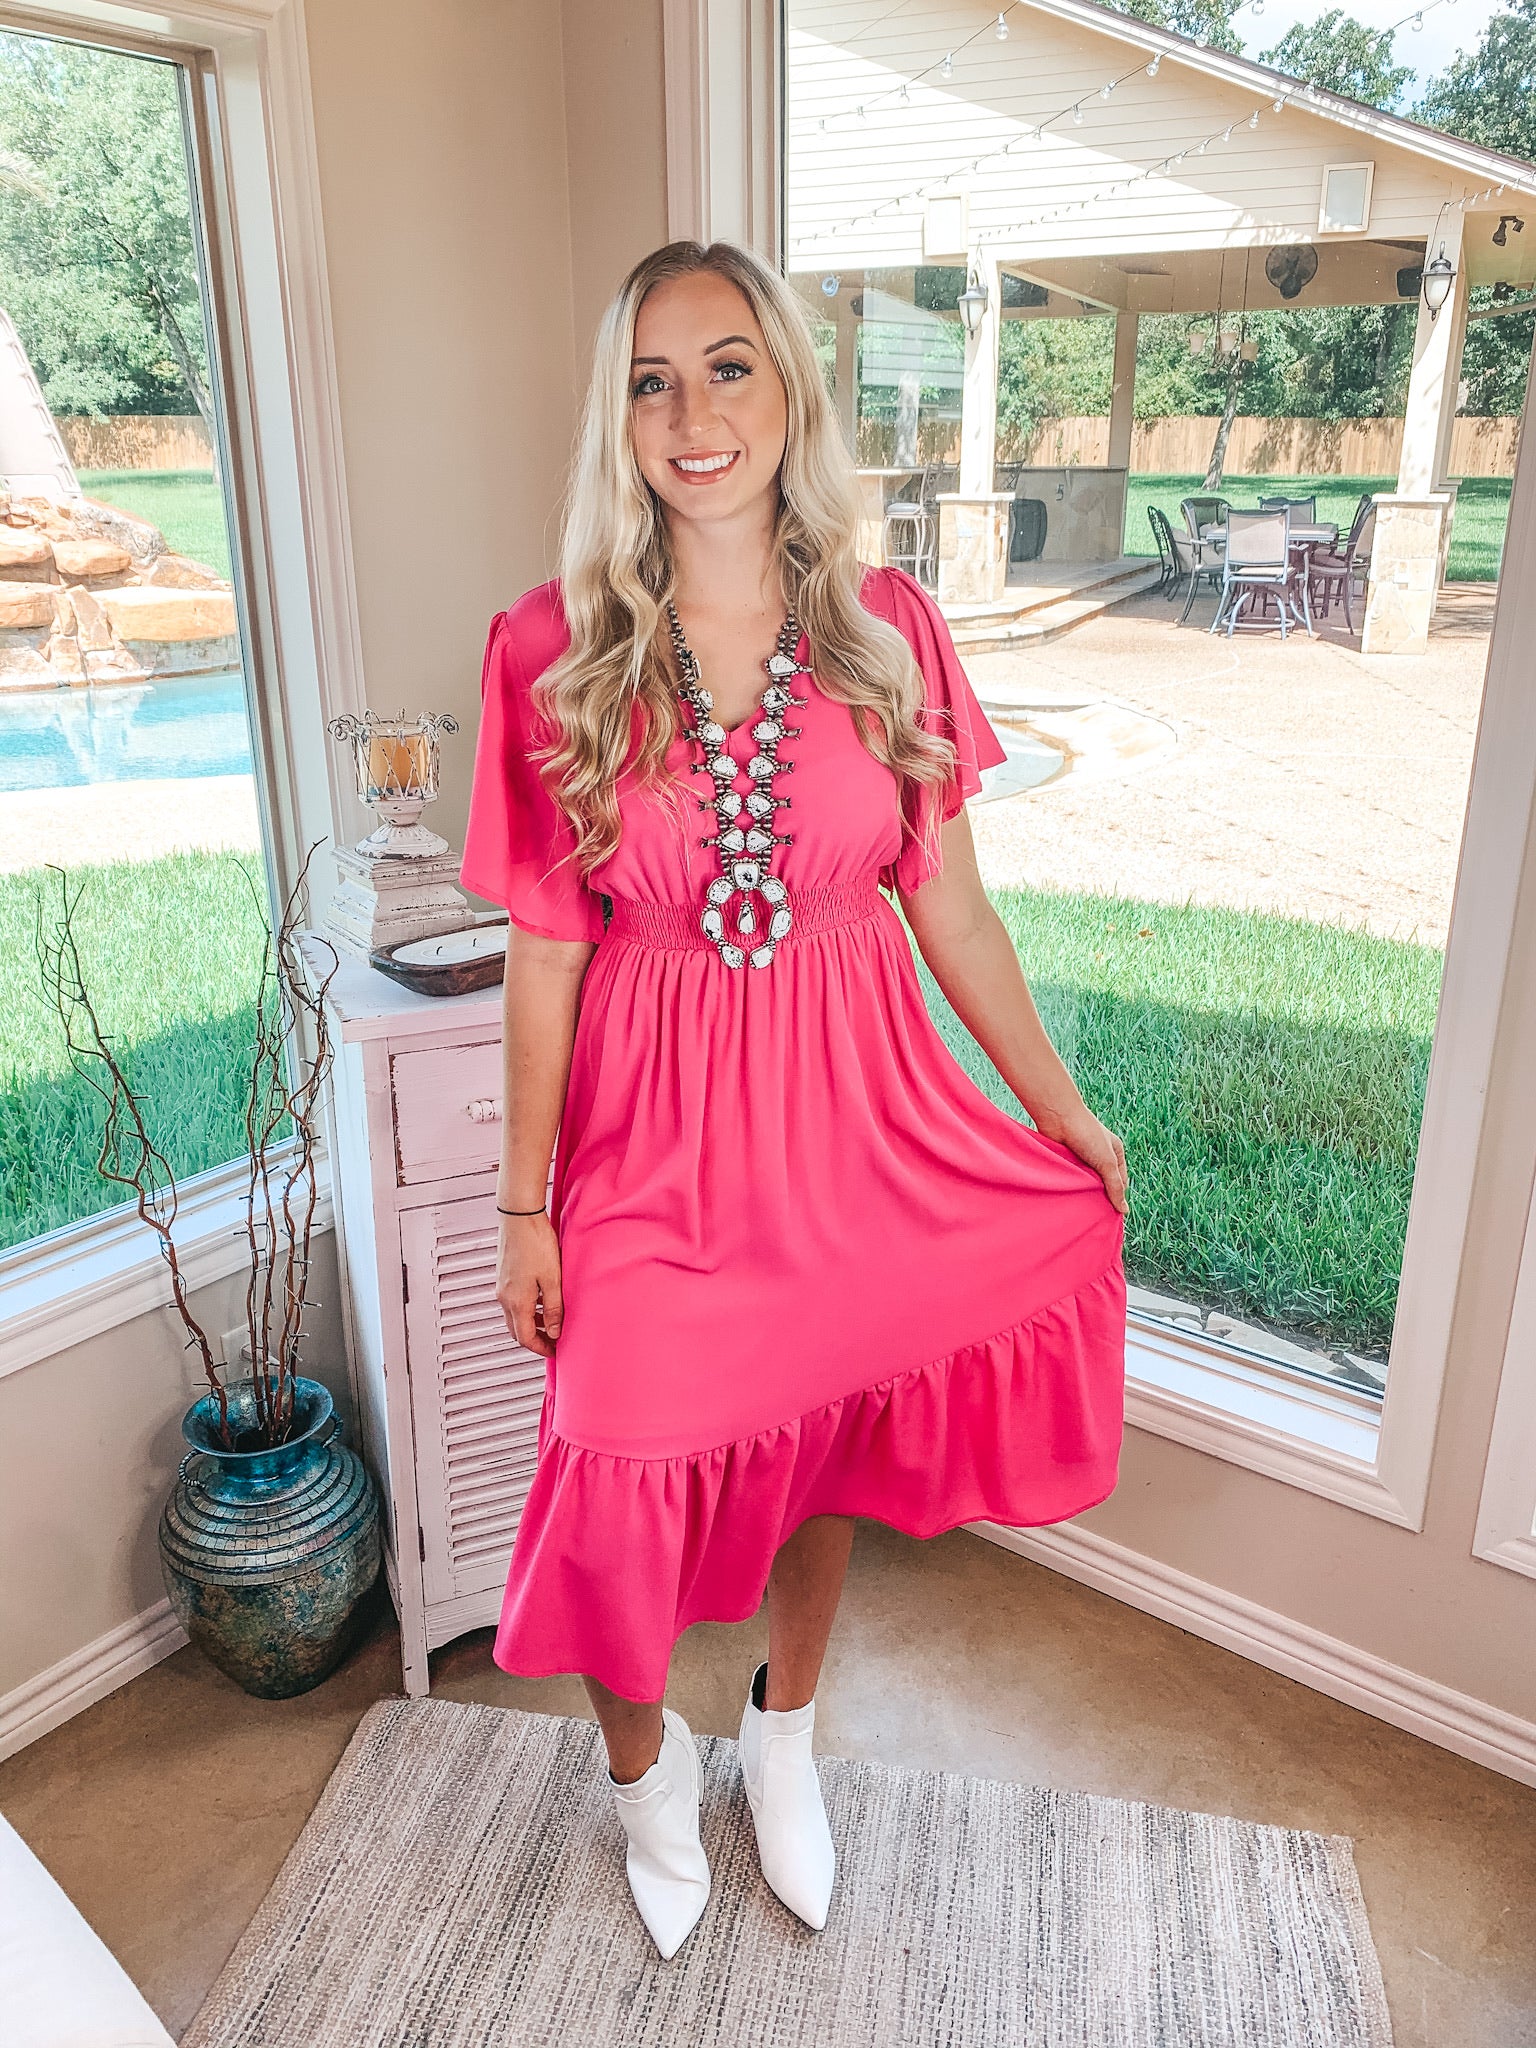 Last Chance Size Small & Large | Freelance Dreamer Short Sleeve Midi Dress with Ruffle Hemline in Magenta - Giddy Up Glamour Boutique